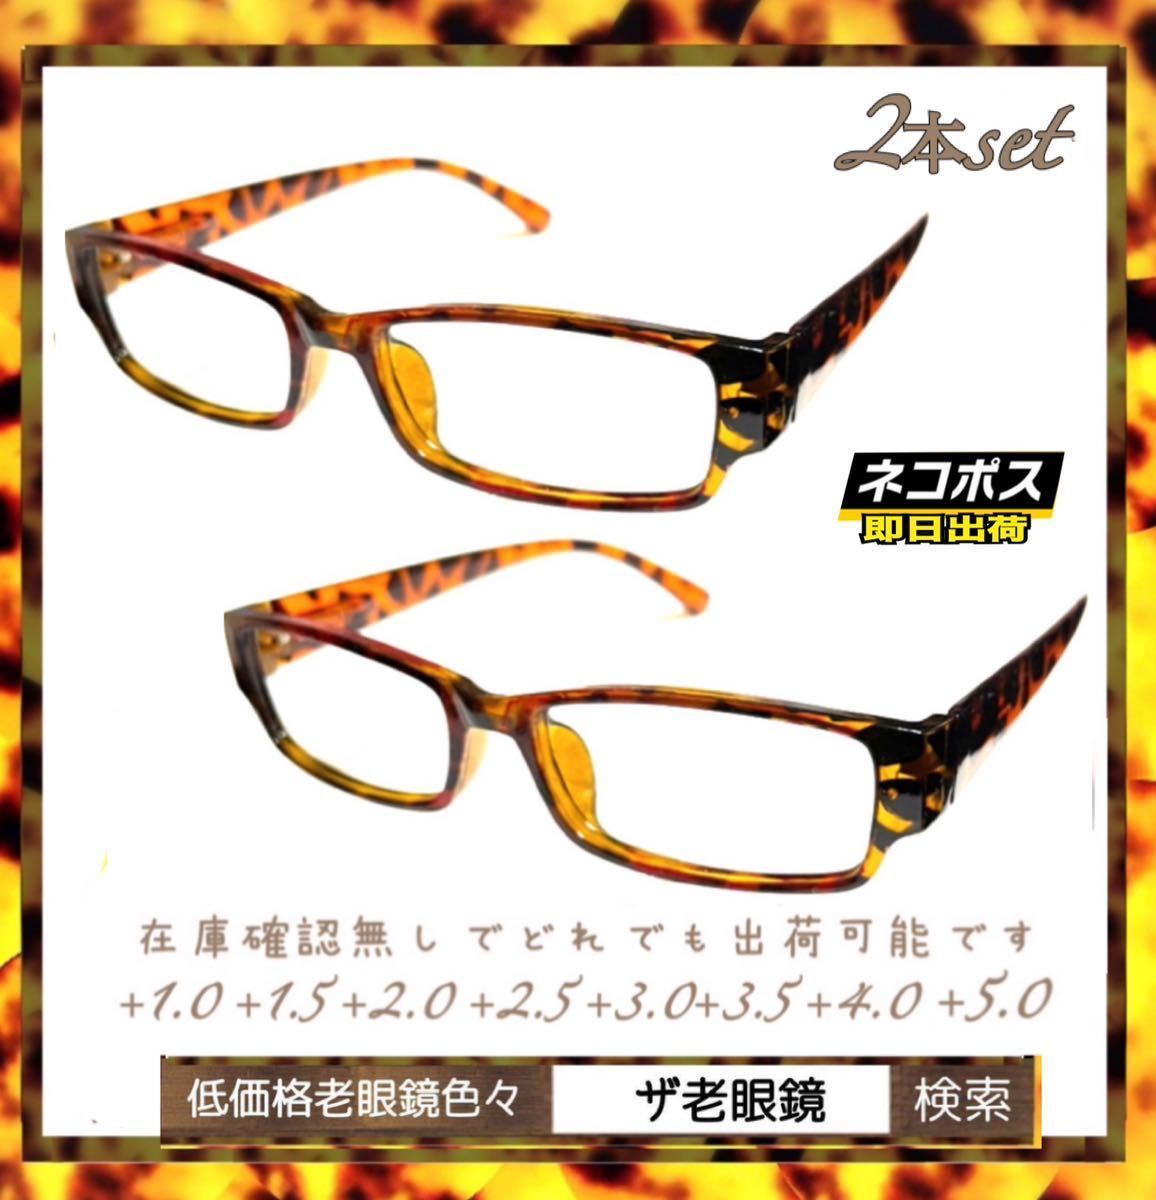 +1.02 pcs set slim .... manner cat pohs .. same day shipping (+1.0 +1.5 +2.0 +2.5 +3.0+3.5 +4.0 +5.0) The farsighted glasses 